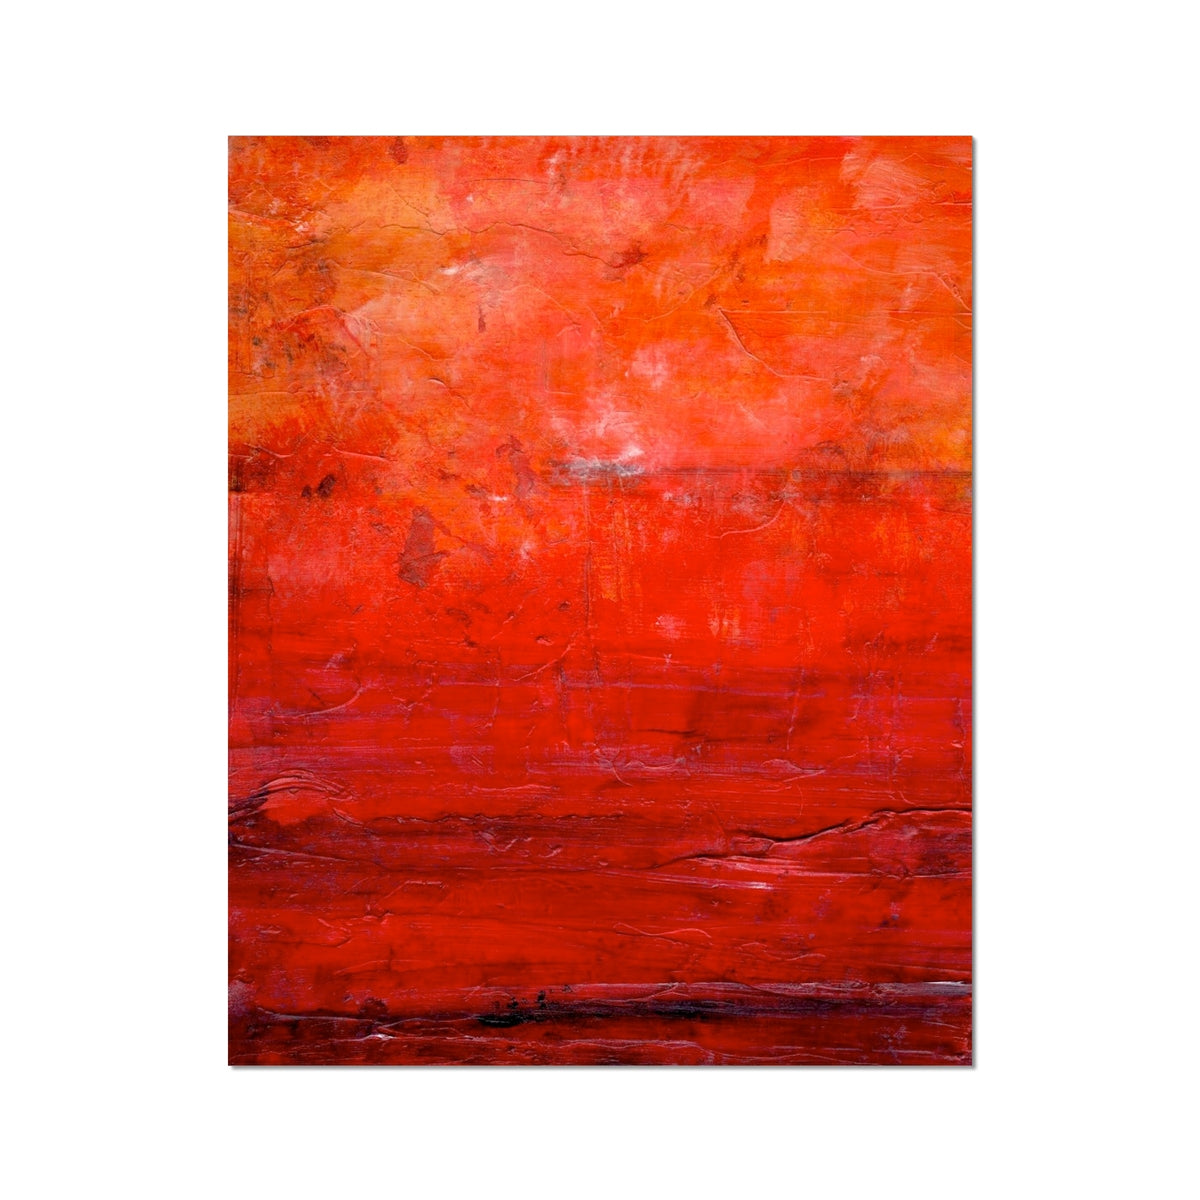 Abstract Summer Painting | Artist Proof Collector Prints From Scotland-Artist Proof Collector Prints-Abstract & Impressionistic Art Gallery-16"x20"-Paintings, Prints, Homeware, Art Gifts From Scotland By Scottish Artist Kevin Hunter